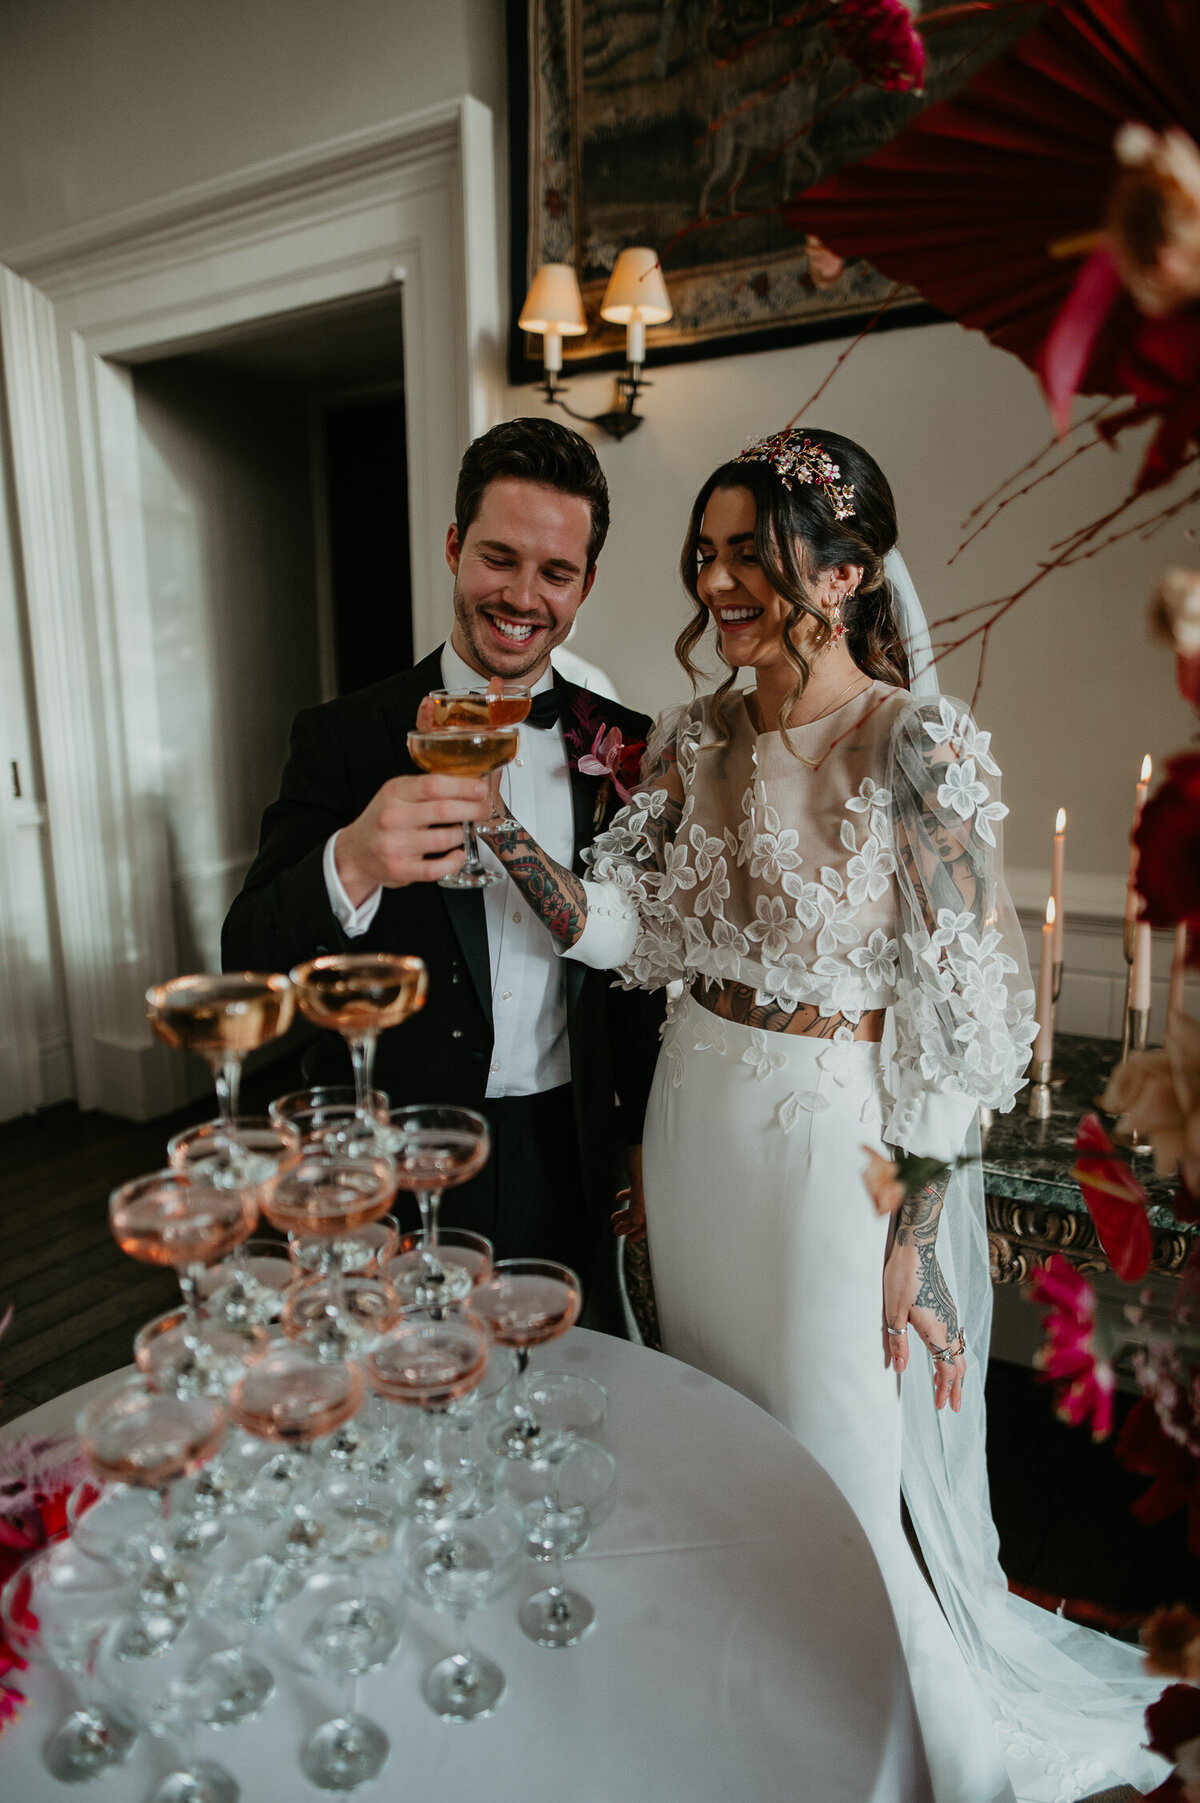 A couple take a Sio of champagne after pouring their champagne town. The bride is wearing a stunning two piece and the groom is wearing a black tie suit.